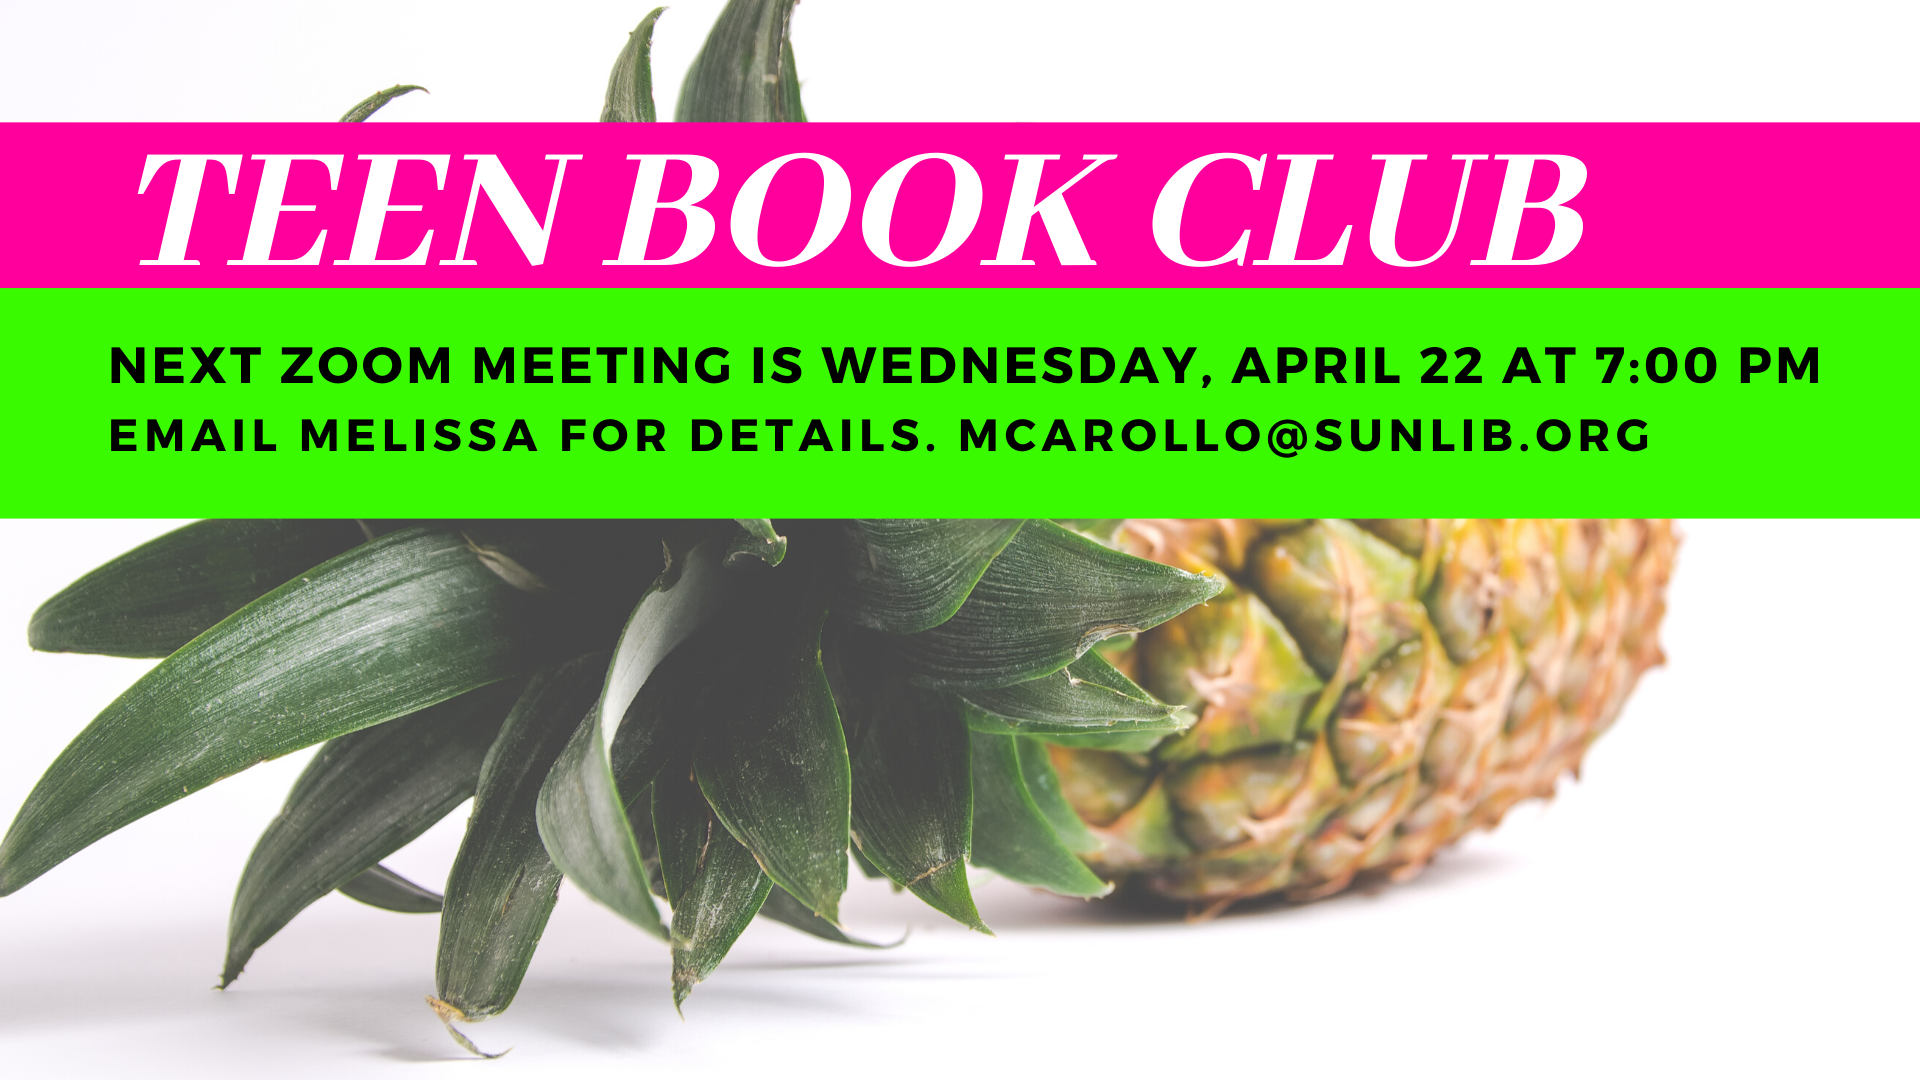 poster highlighting teen book club and a pineapple